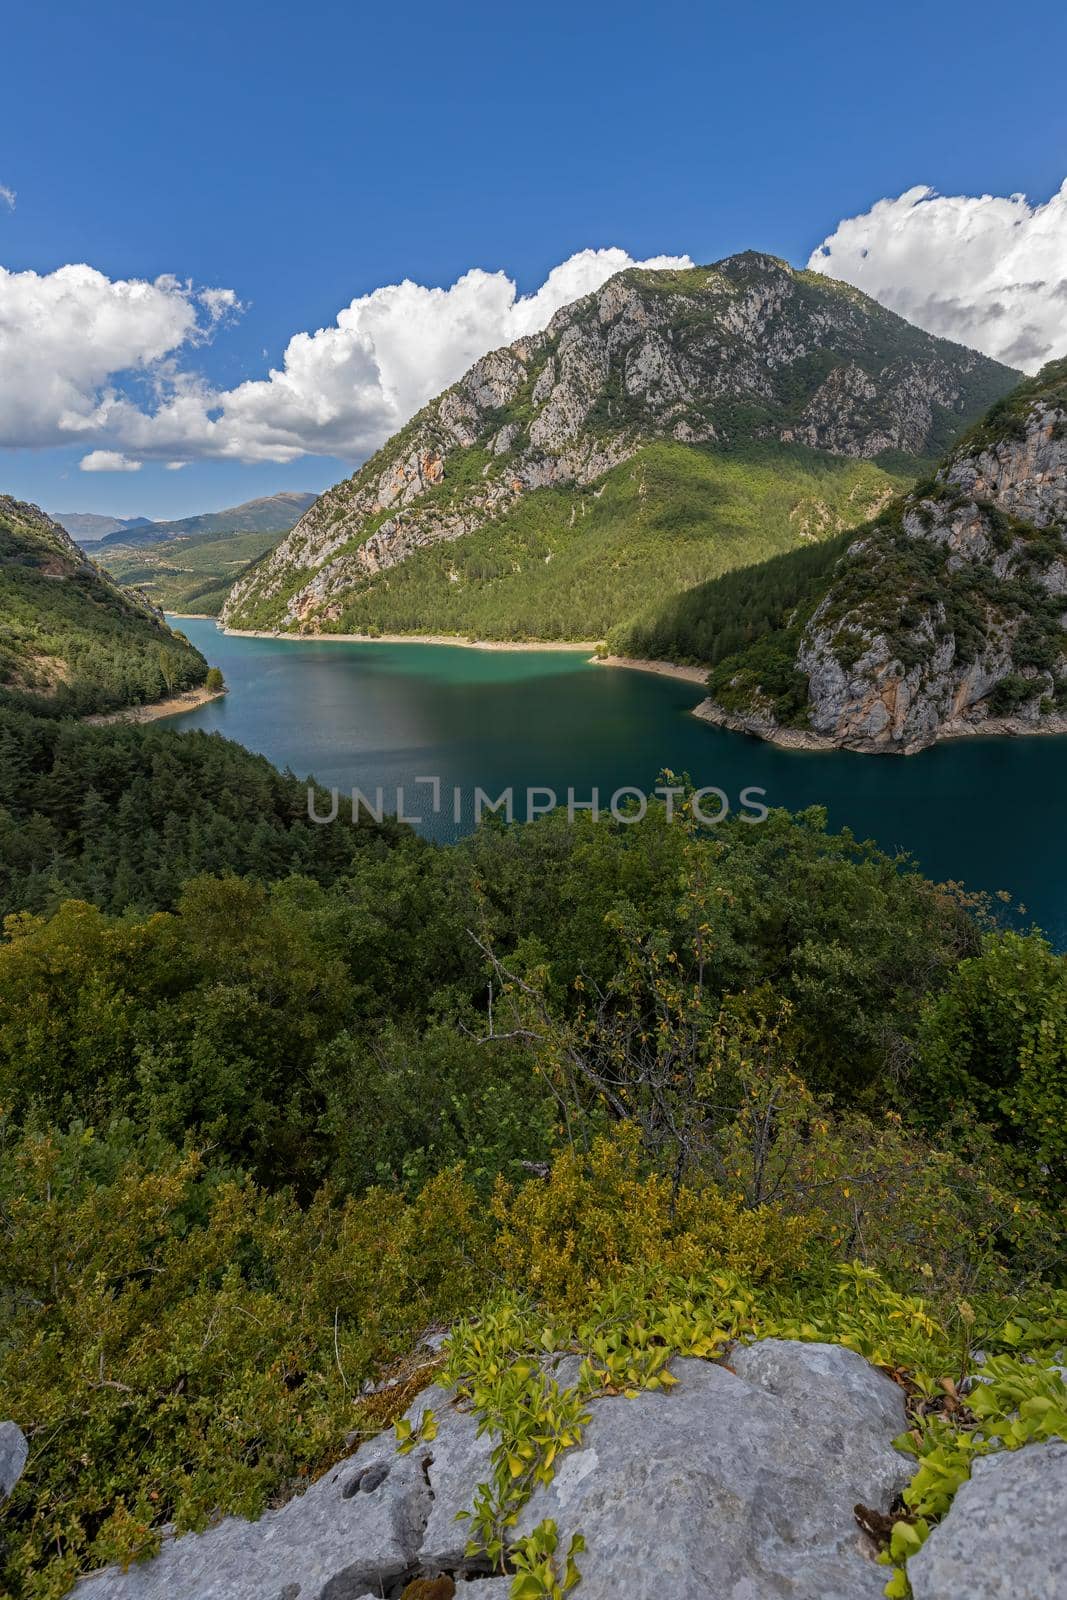 Huge reservoir in the Spanish Pyrenees, on the border of Catalonia and Aragon. Panta d Escalas (Swamp of Stairs) by Digoarpi